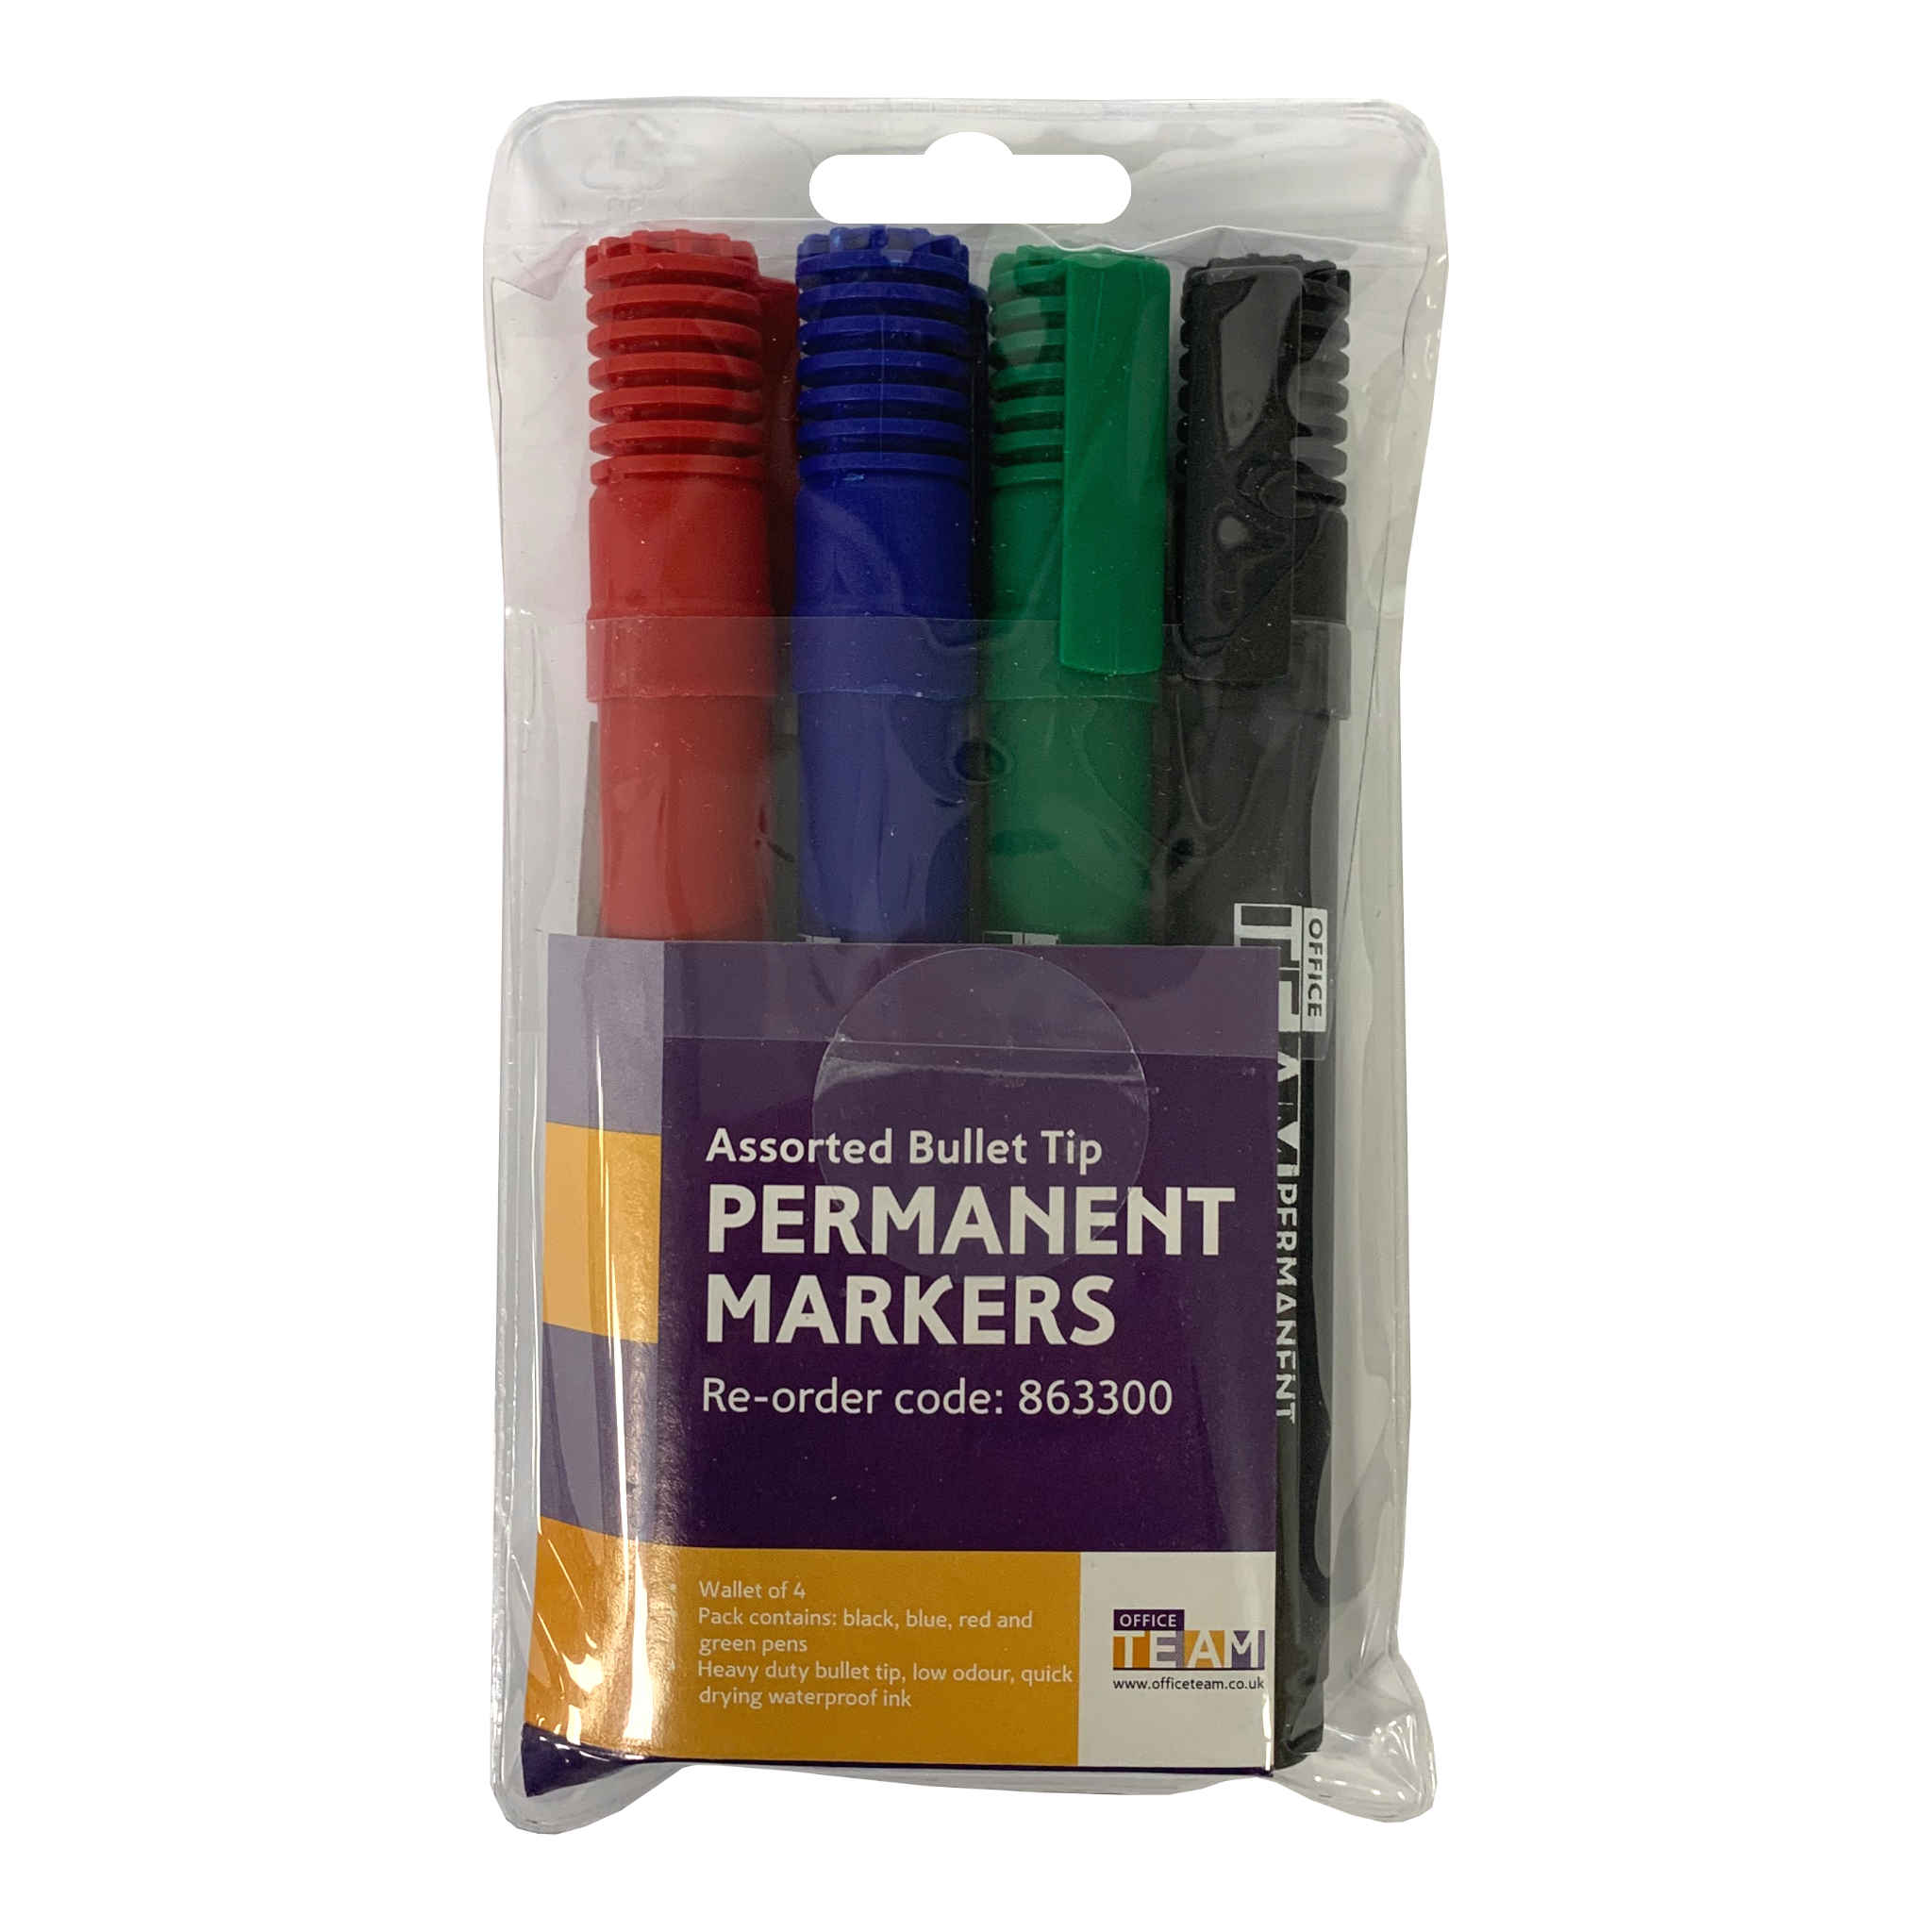 Bullet Tip Permanent Markers | Assorted | 4 Pack